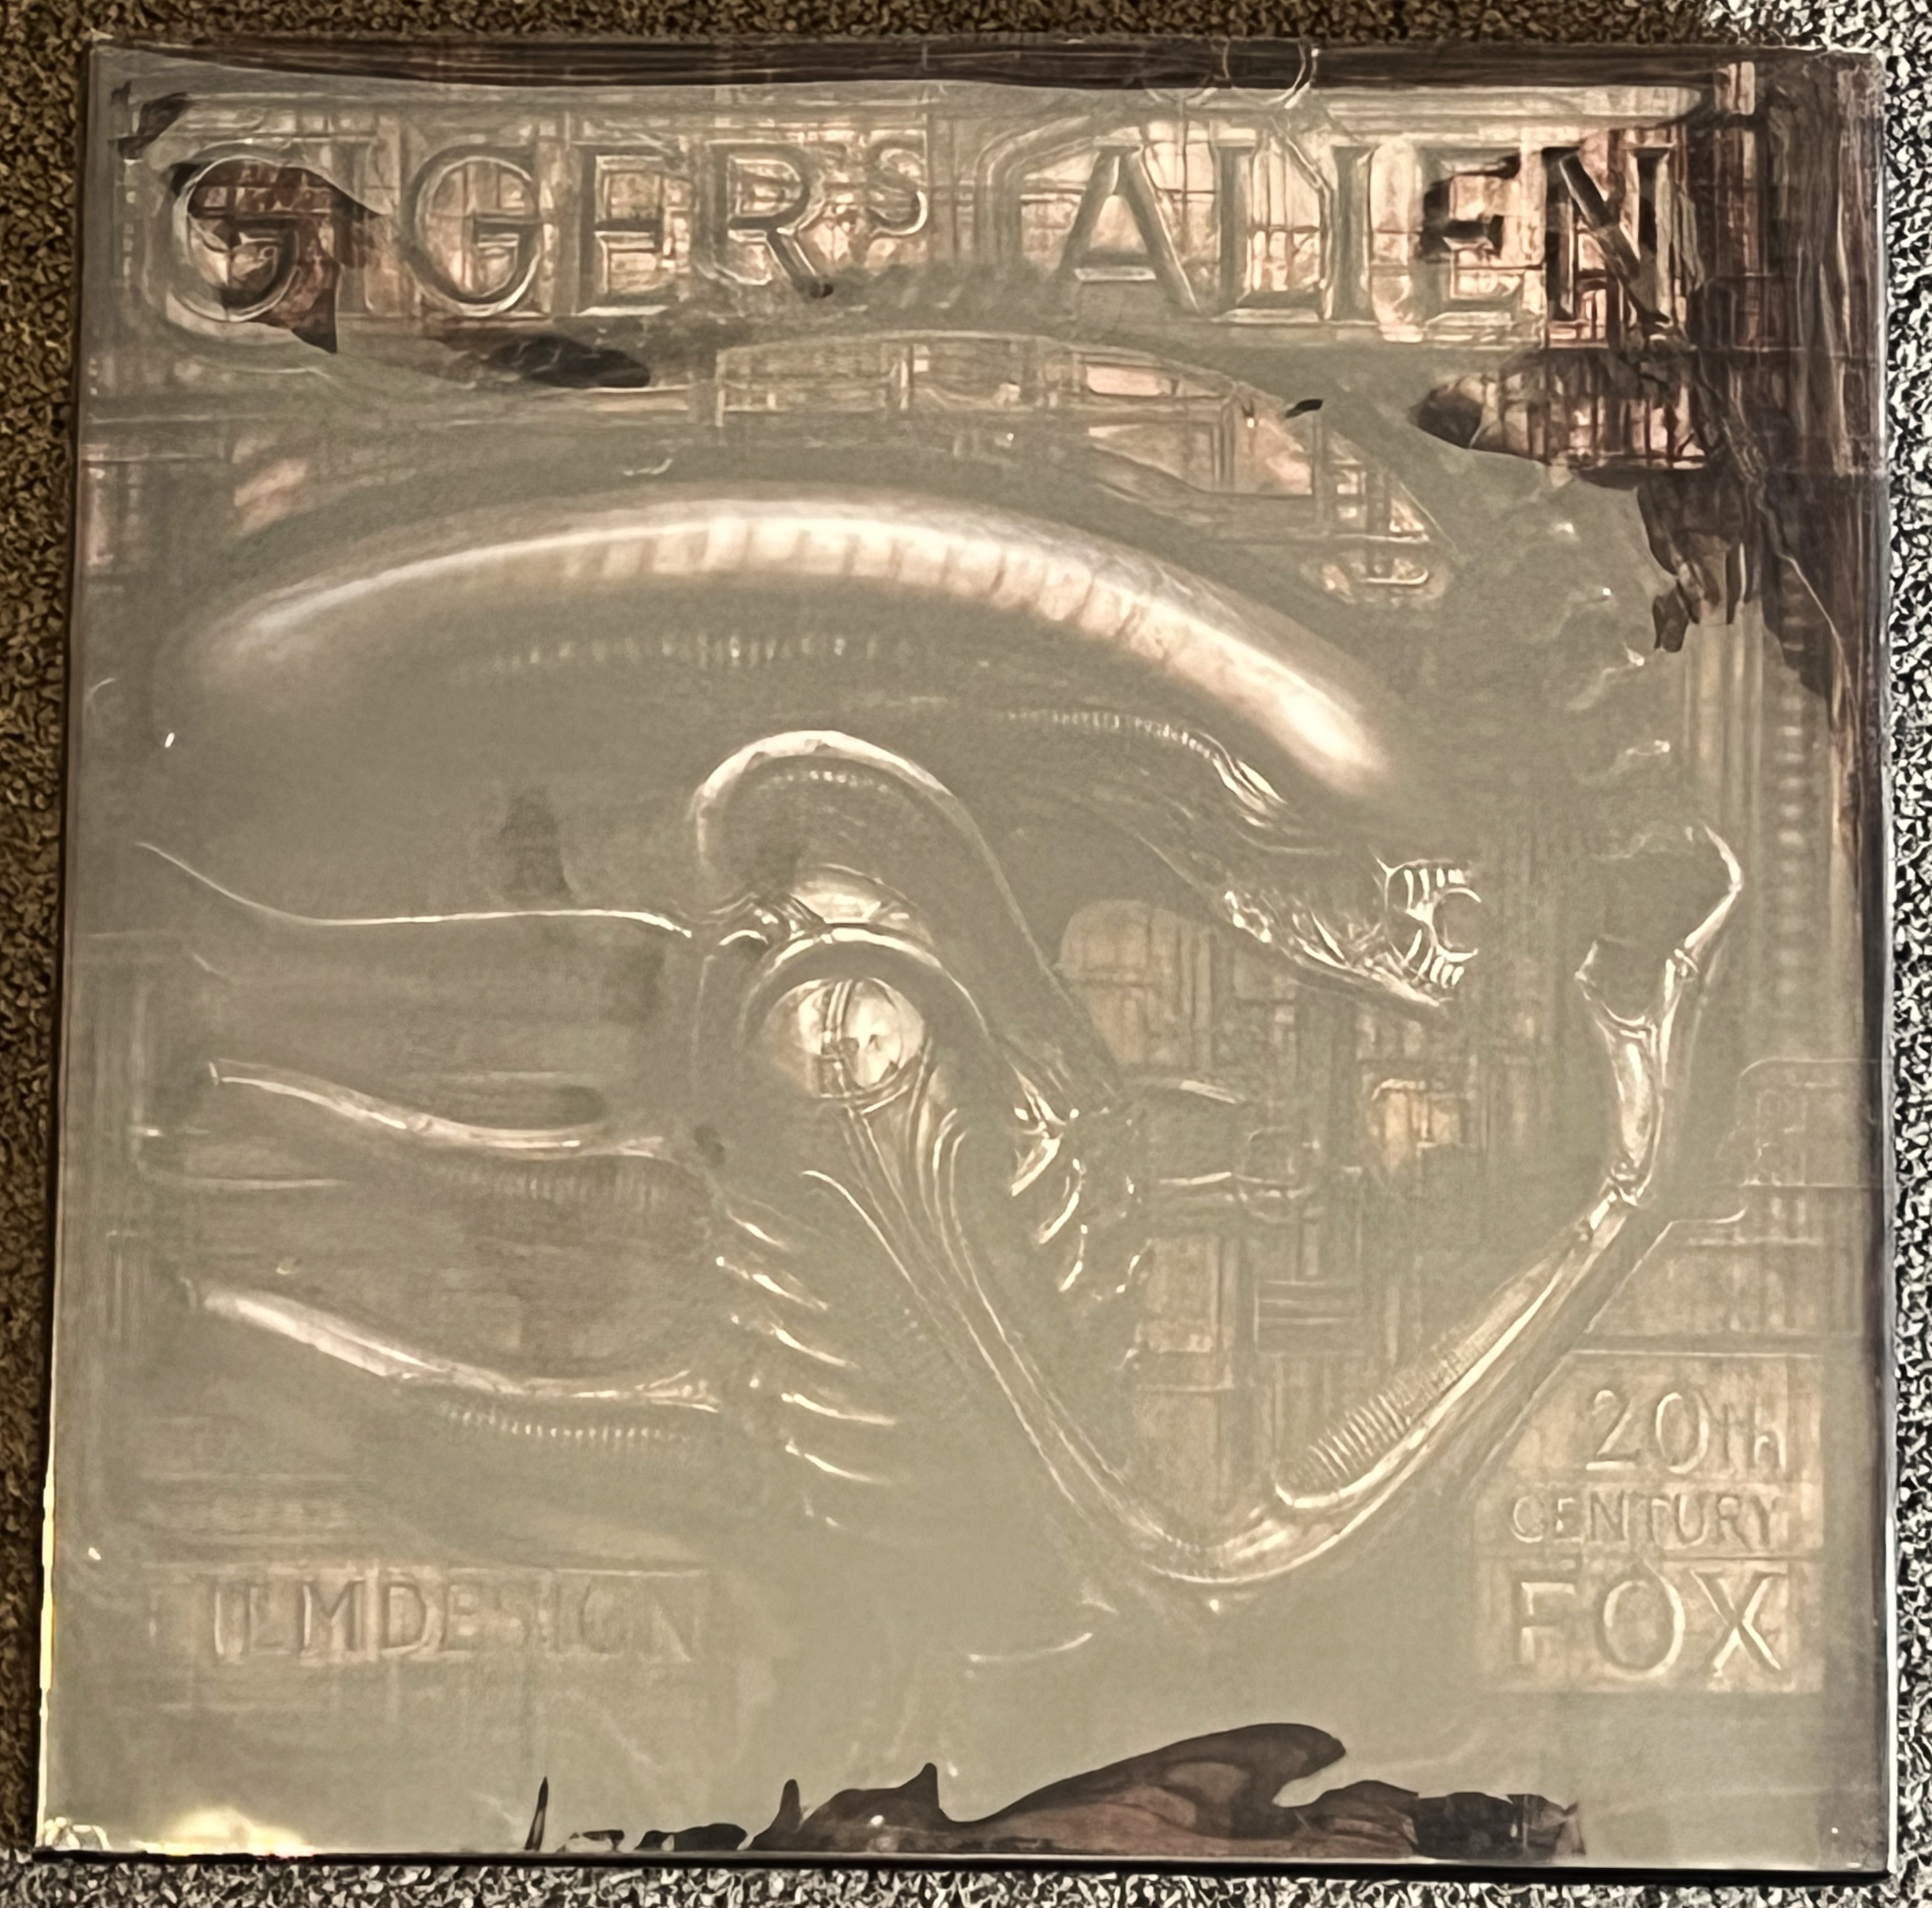 Giger's Alien; Film Design, 20th Century Fox - Giger, H. R. & Timothy Leary (Foreword)